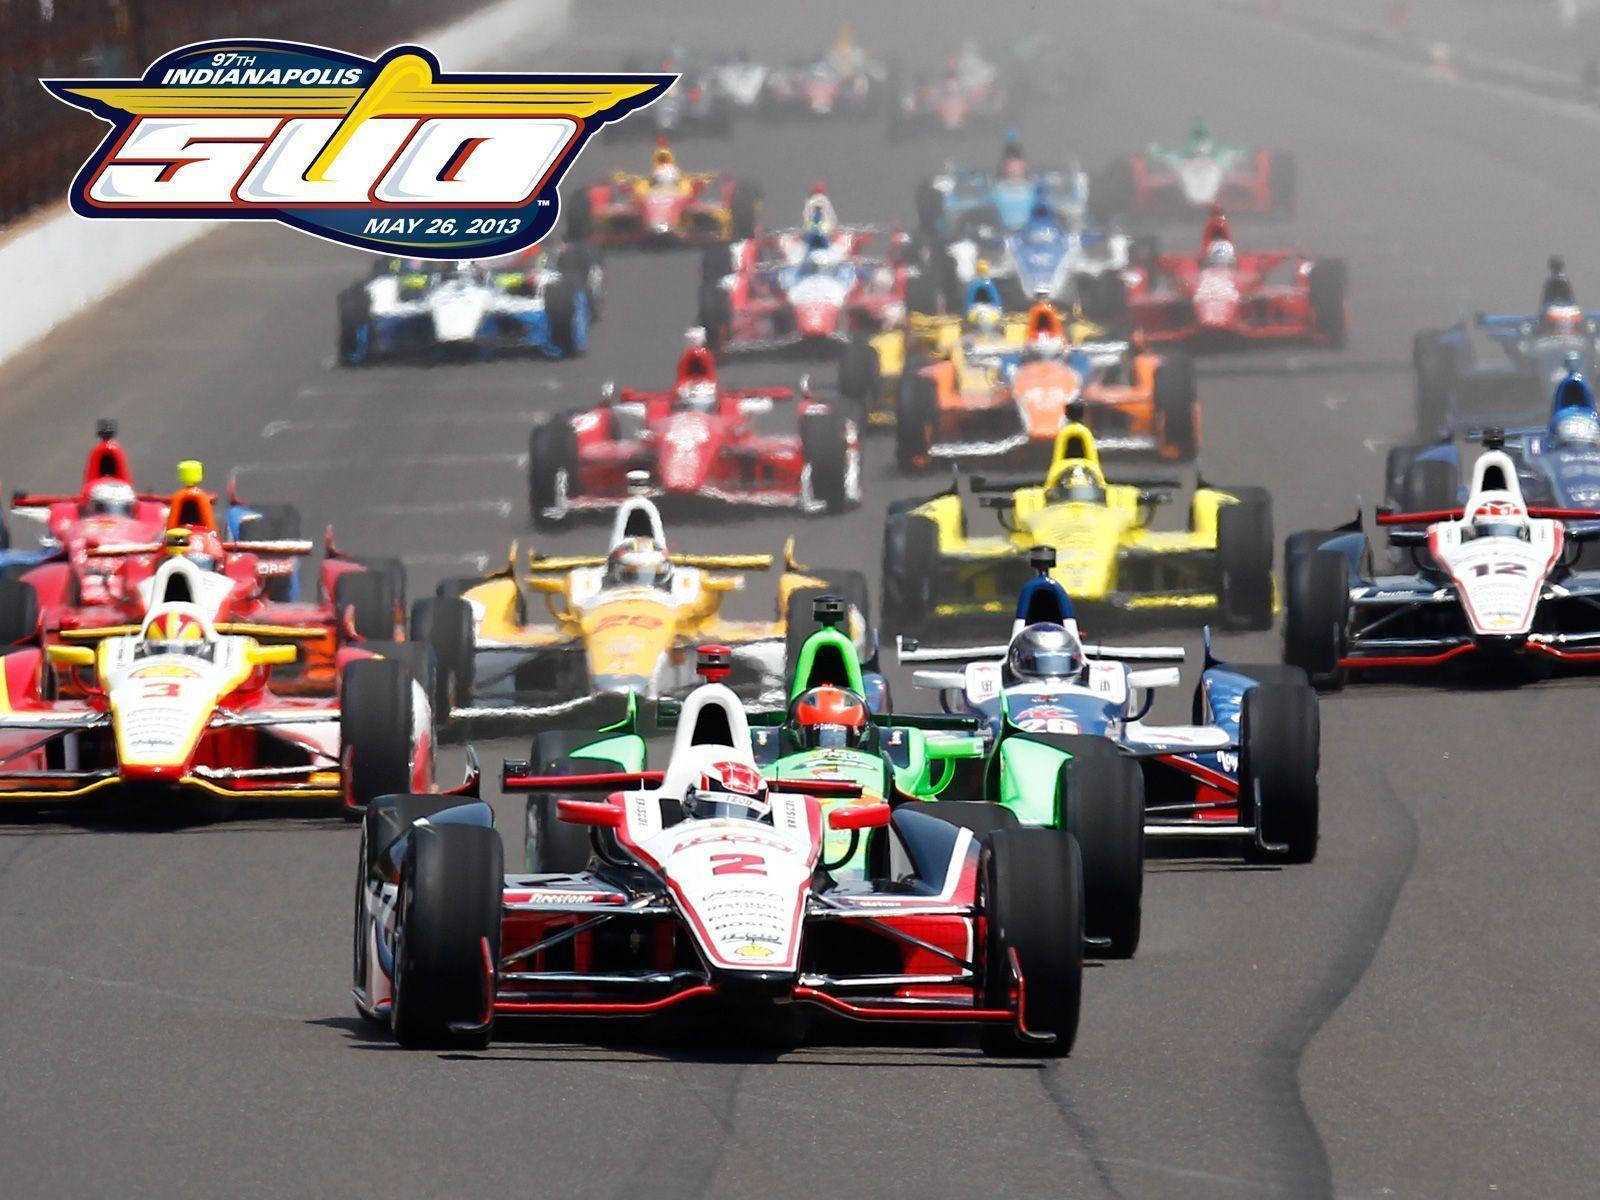 Caption: High-Octane Action at the 97th Indianapolis 500 Auto Racing Wallpaper